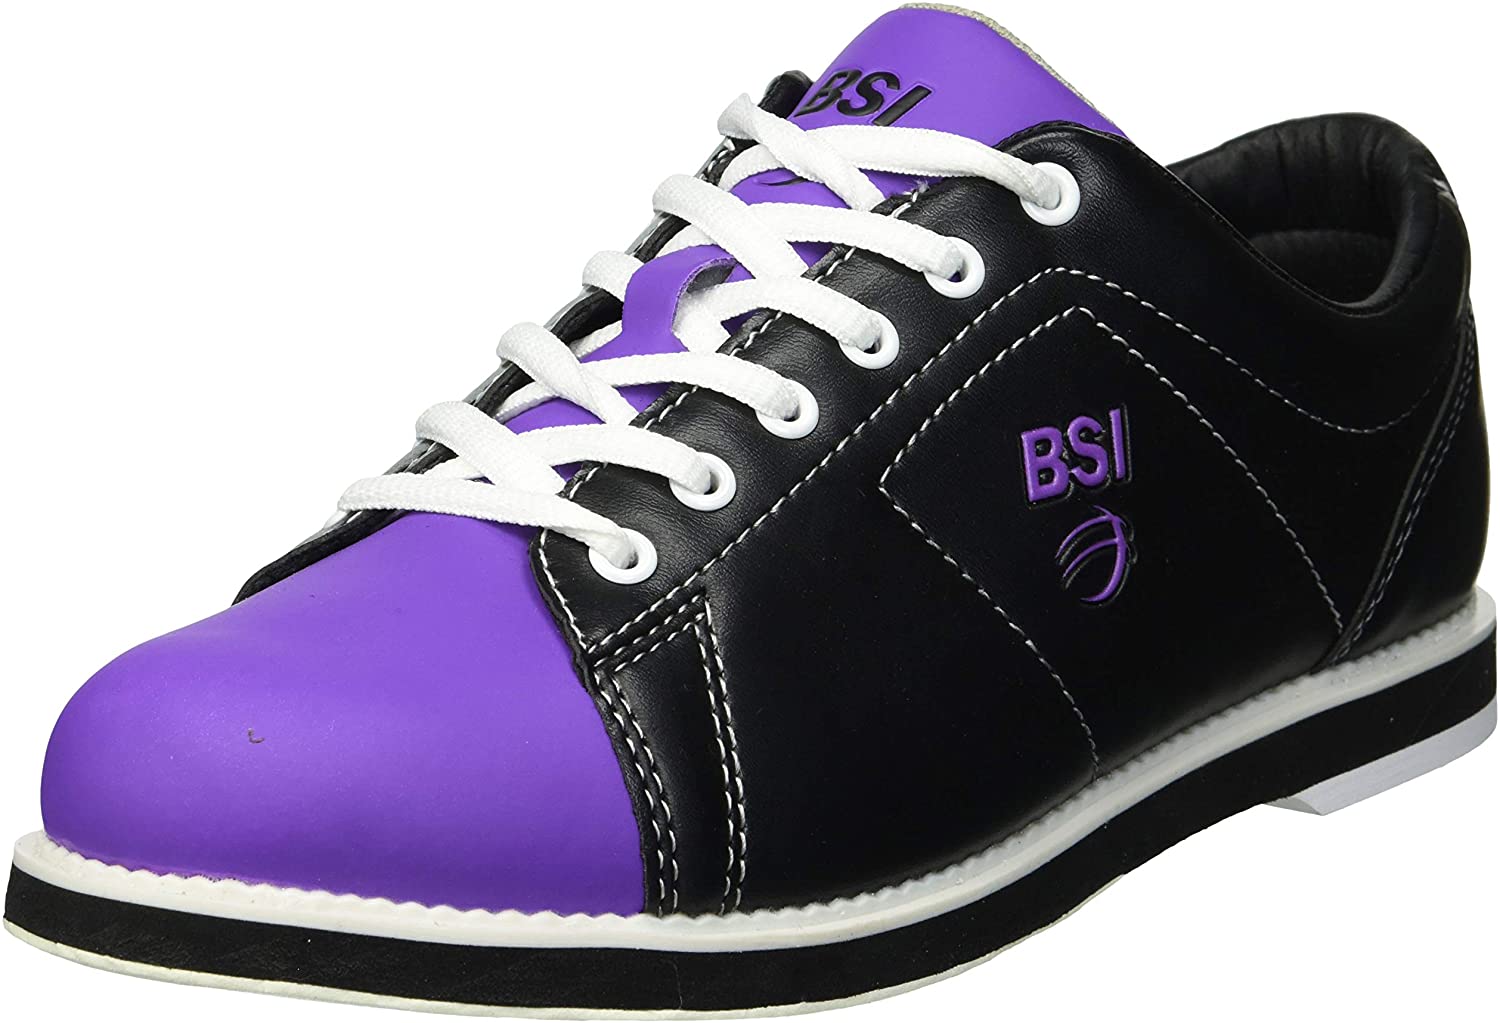 10 Best Bowling Shoes For Women [May 2021] Cart Folder